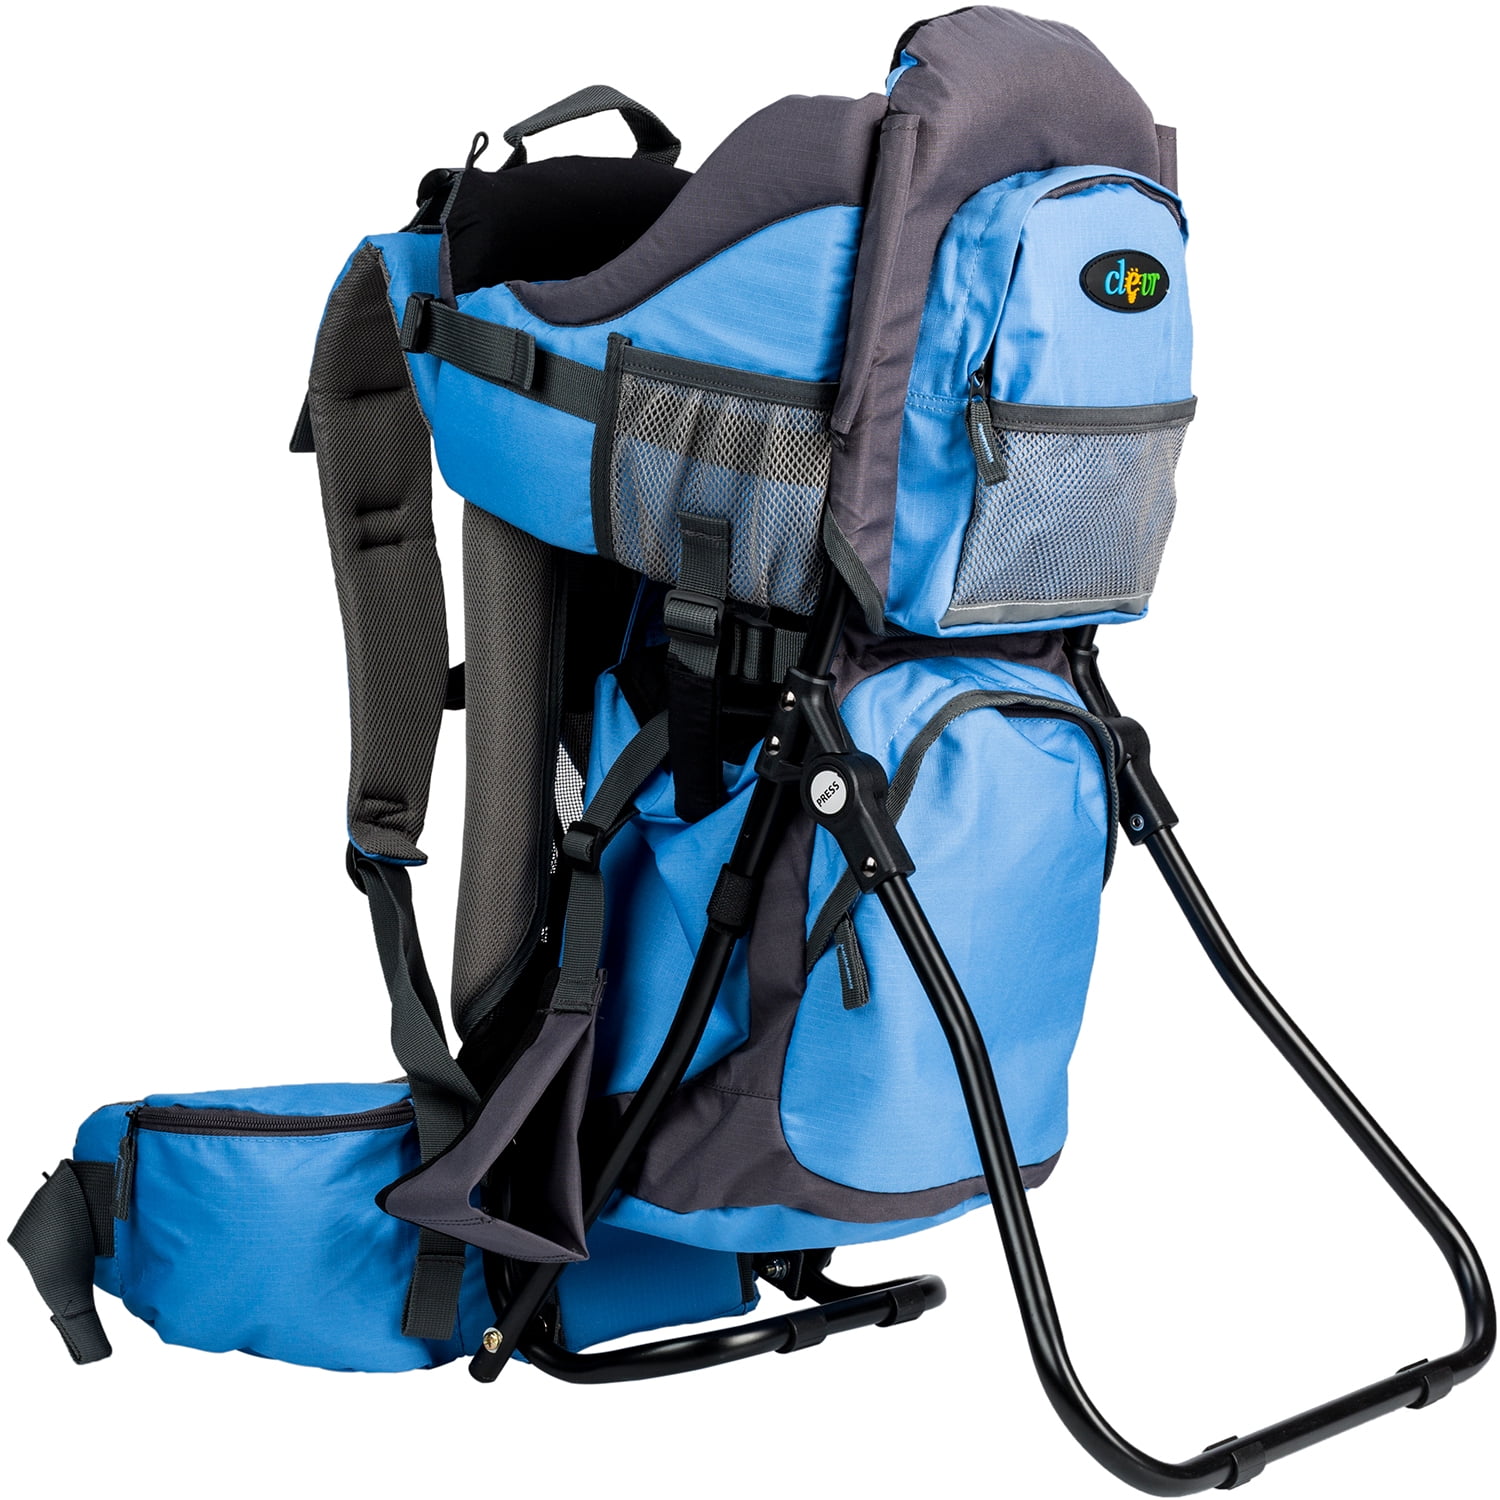 ClevrPlus Deluxe Baby Carrier Outdoor Light Hiking Child Backpack Camping Blue 